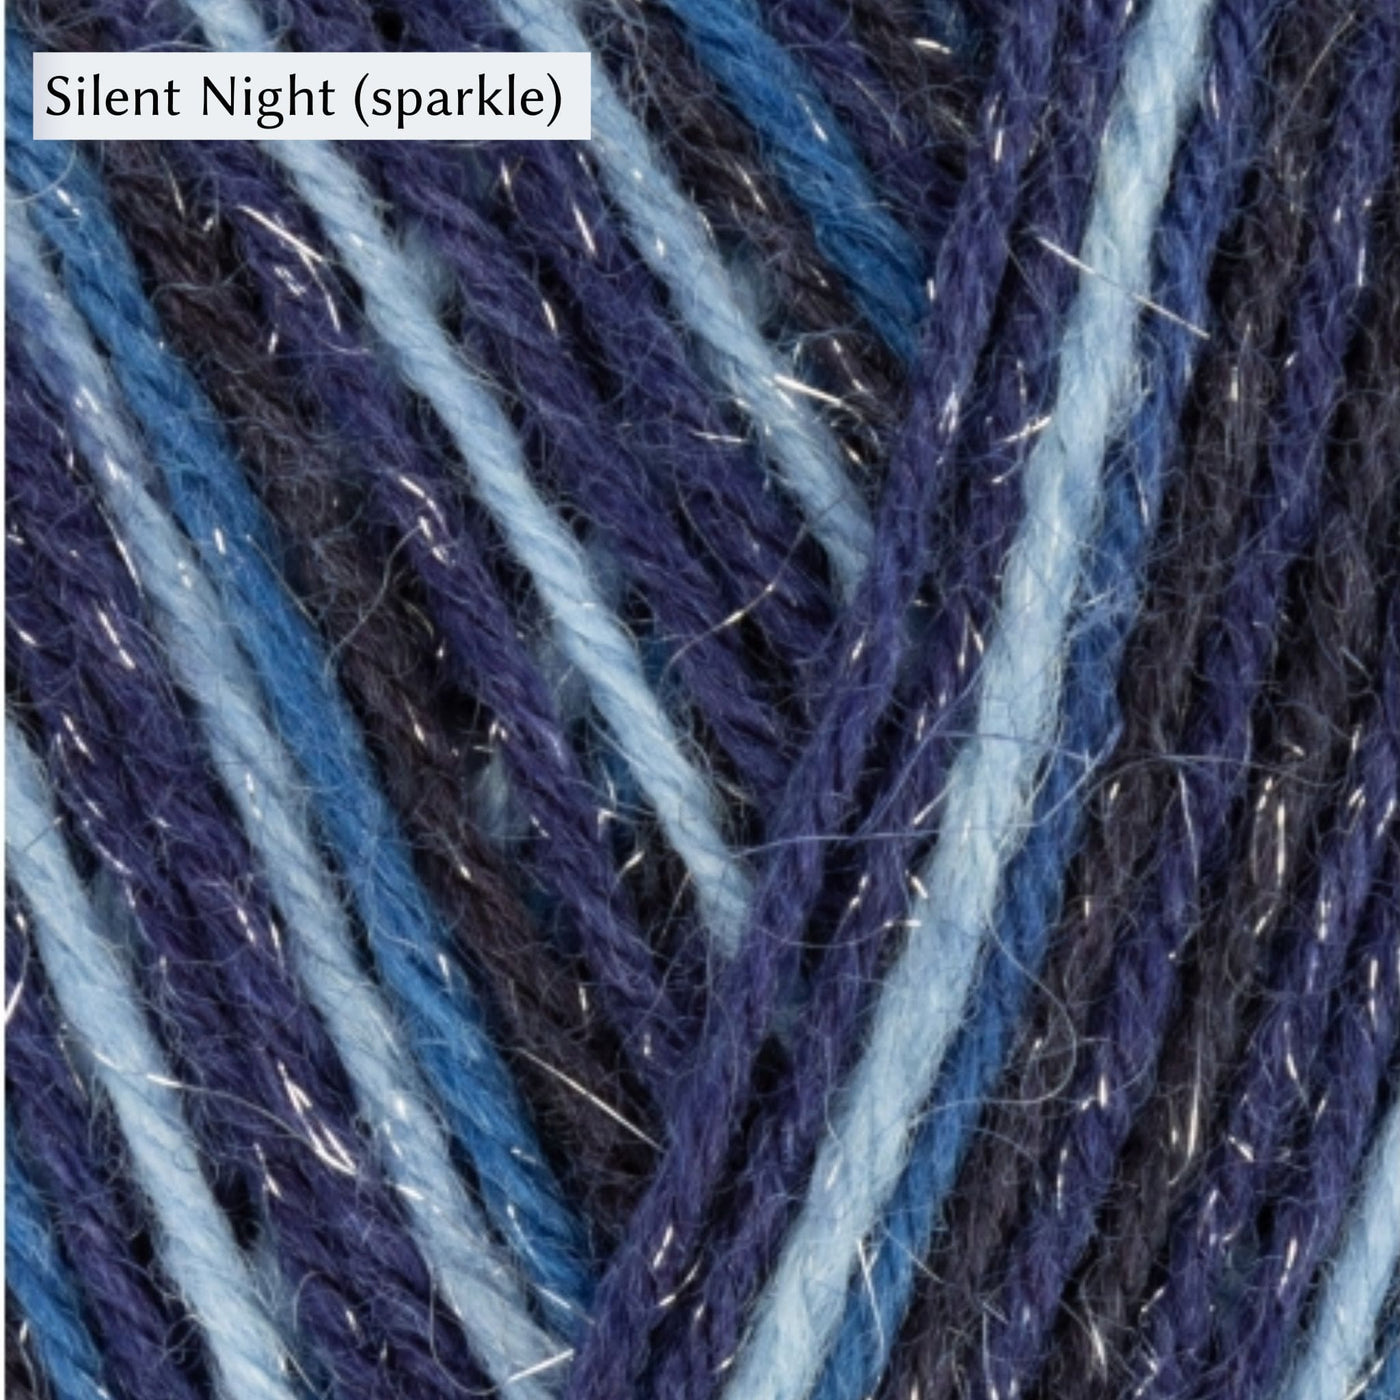 West Yorkshire Spinners Signature 4ply yarn, fingering weight, in color Silent Night (sparkle) with stripes of dark blues and light blue with sparkle